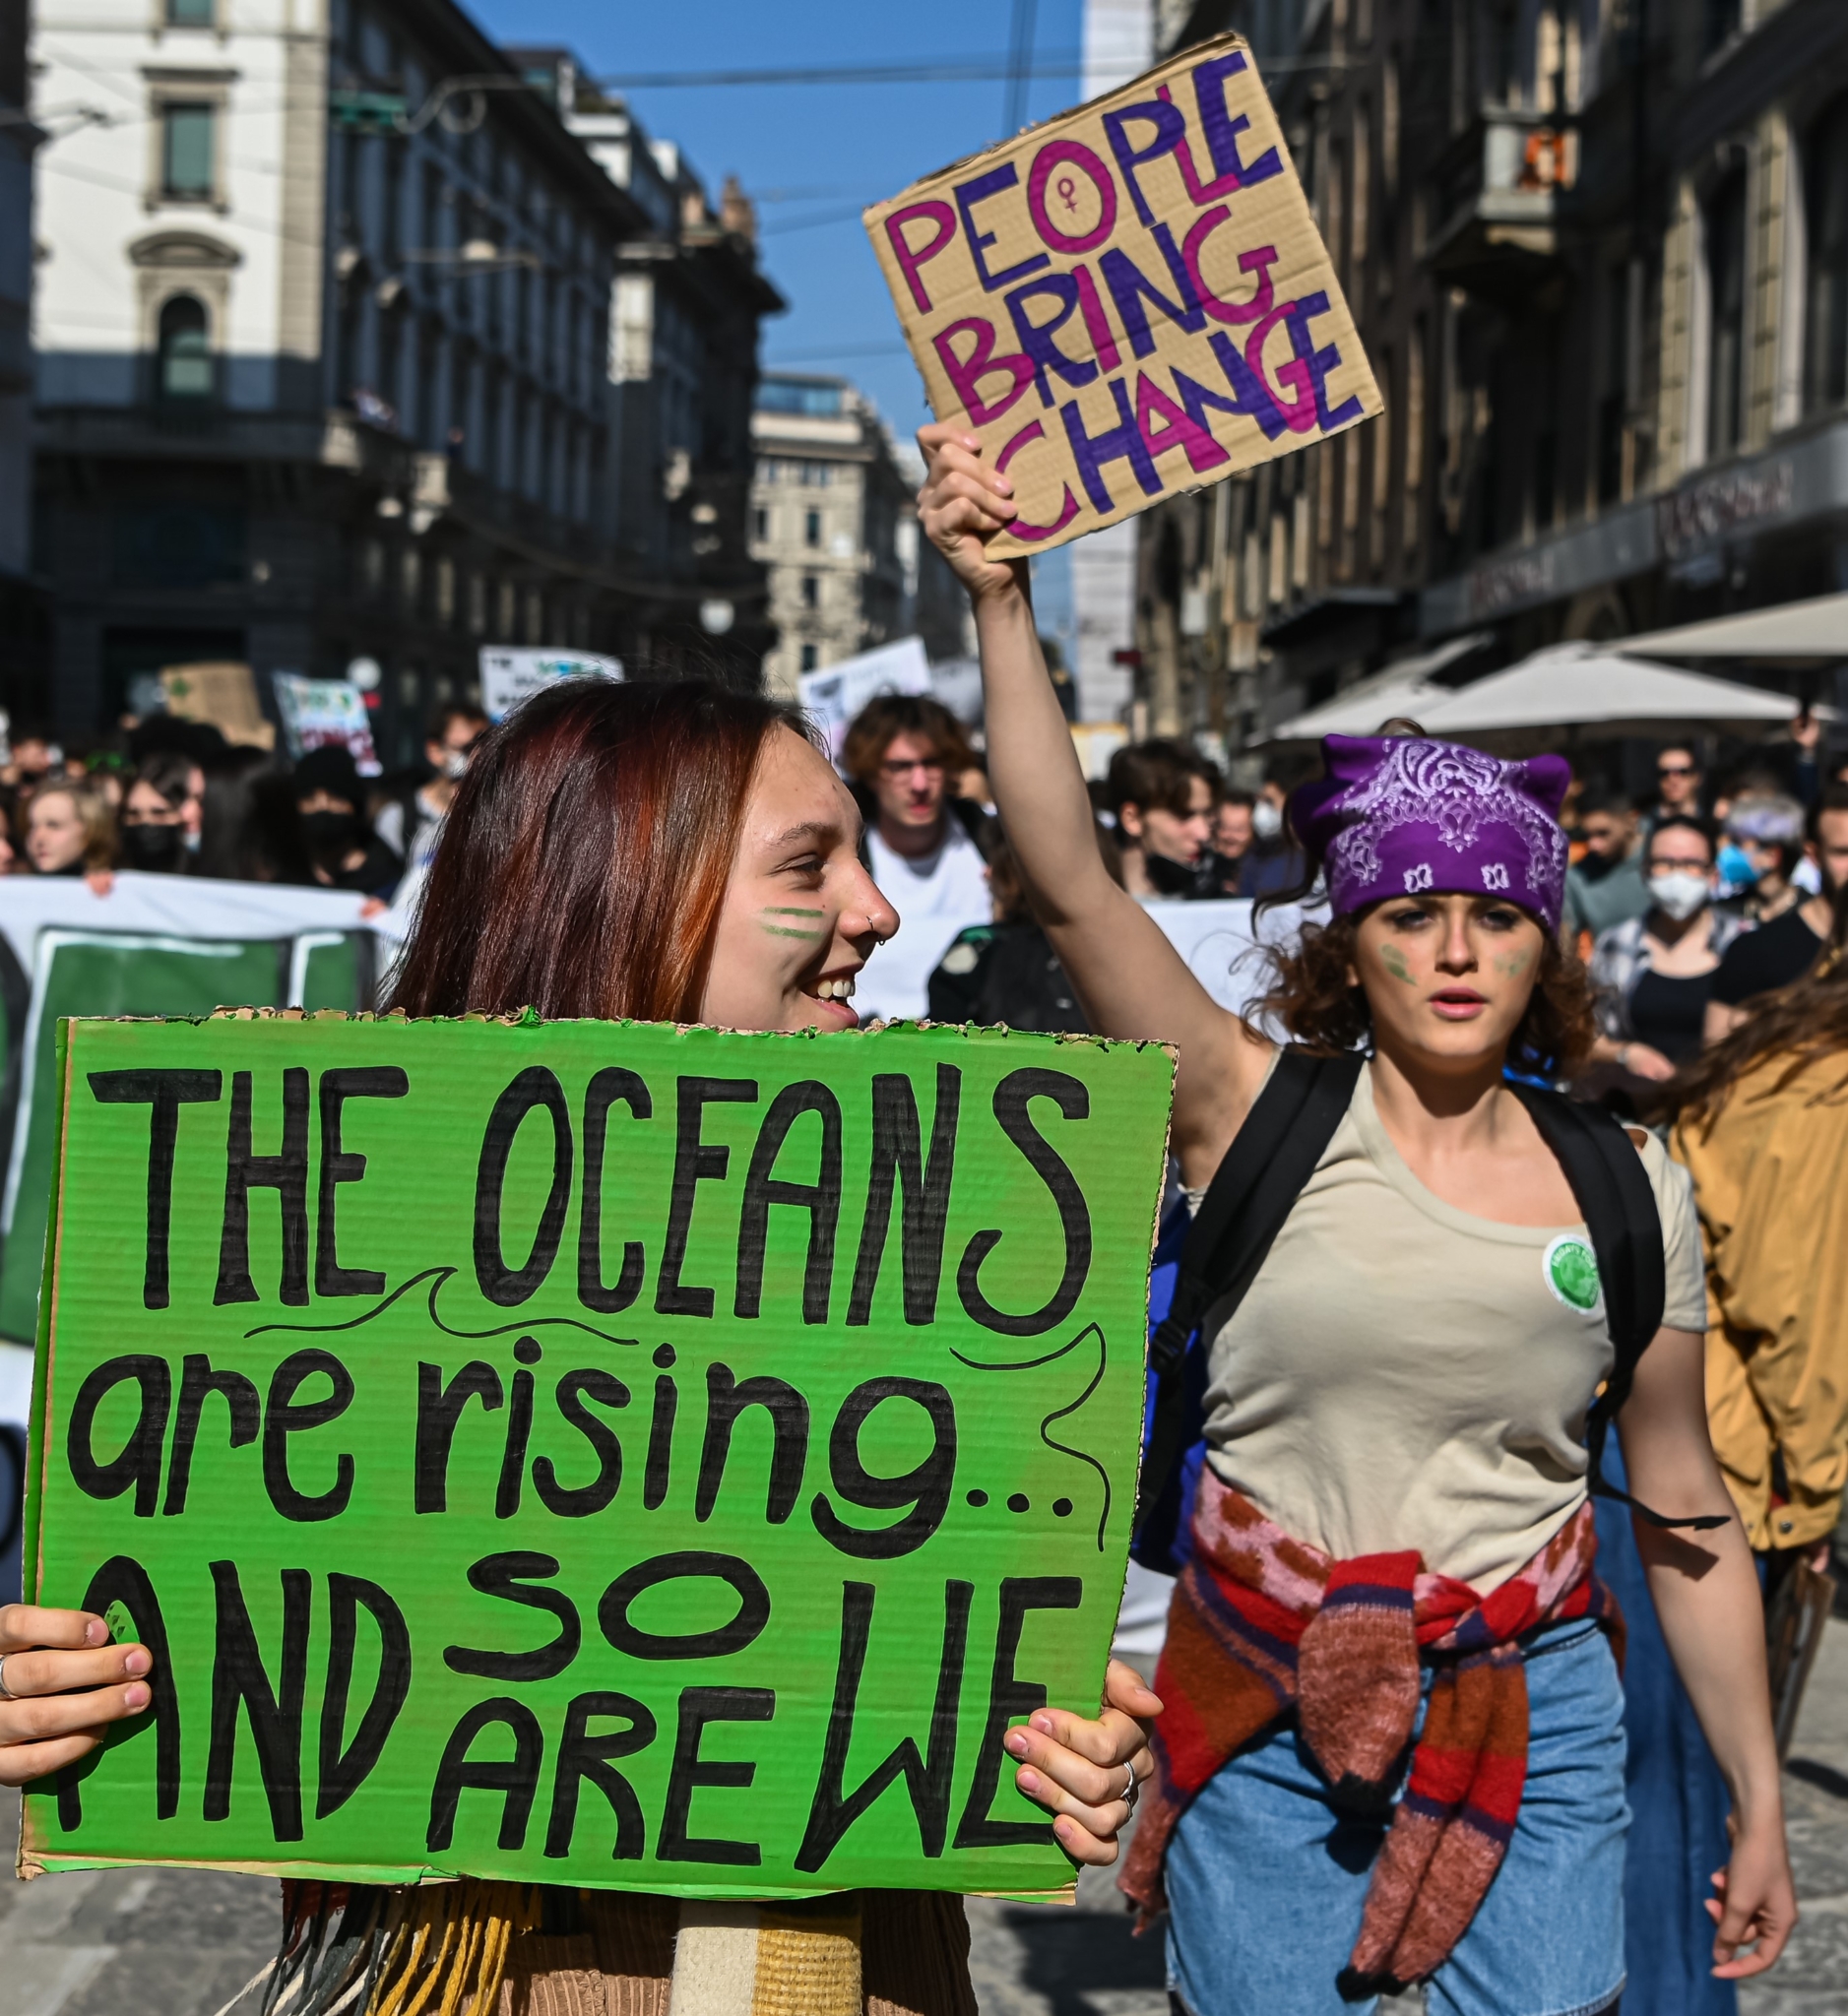 Young women march with signs that say: PEOPLE BRING CHANGE and THE OCEANS ARE RISING, SO ARE WE.